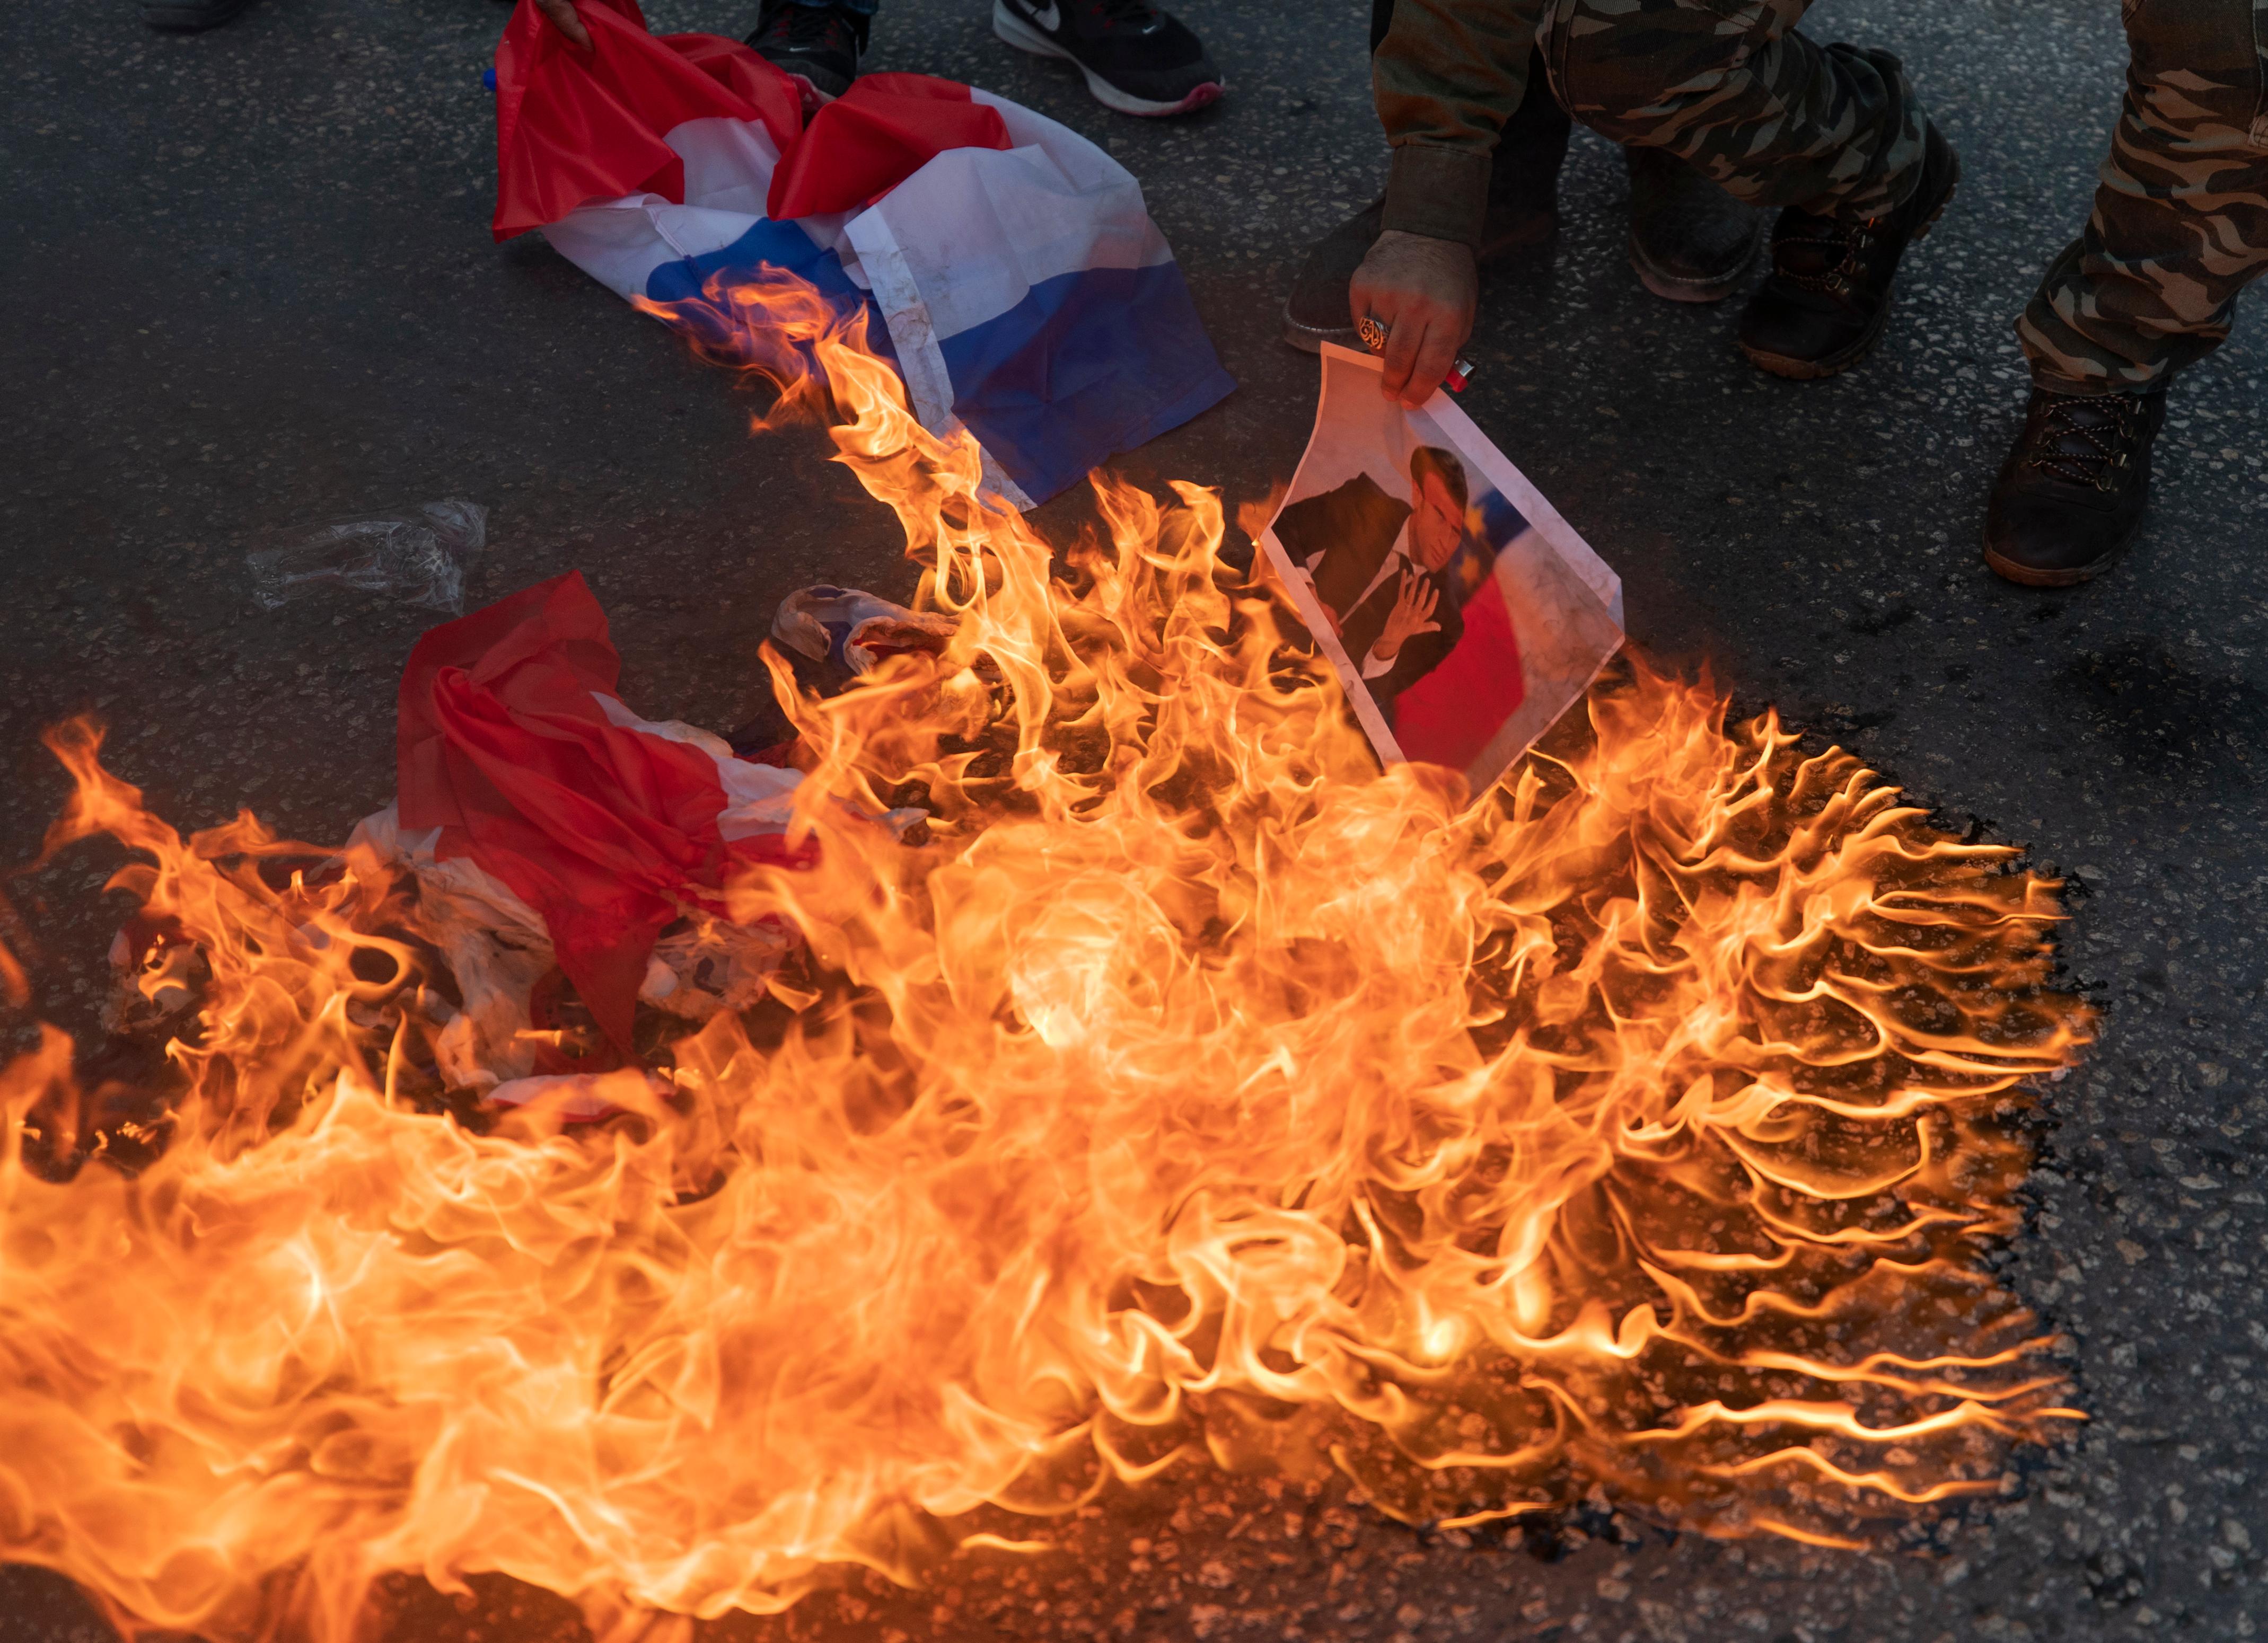 Palestinian protesters burn representa French flags and pictures of French President Emmanuel Macron during a protest against the publishing of caricatures of the Prophet Muhammad they deem blasphemous, in the West Bank city of Ramallah, Tuesday, Oct. 27, 2020.